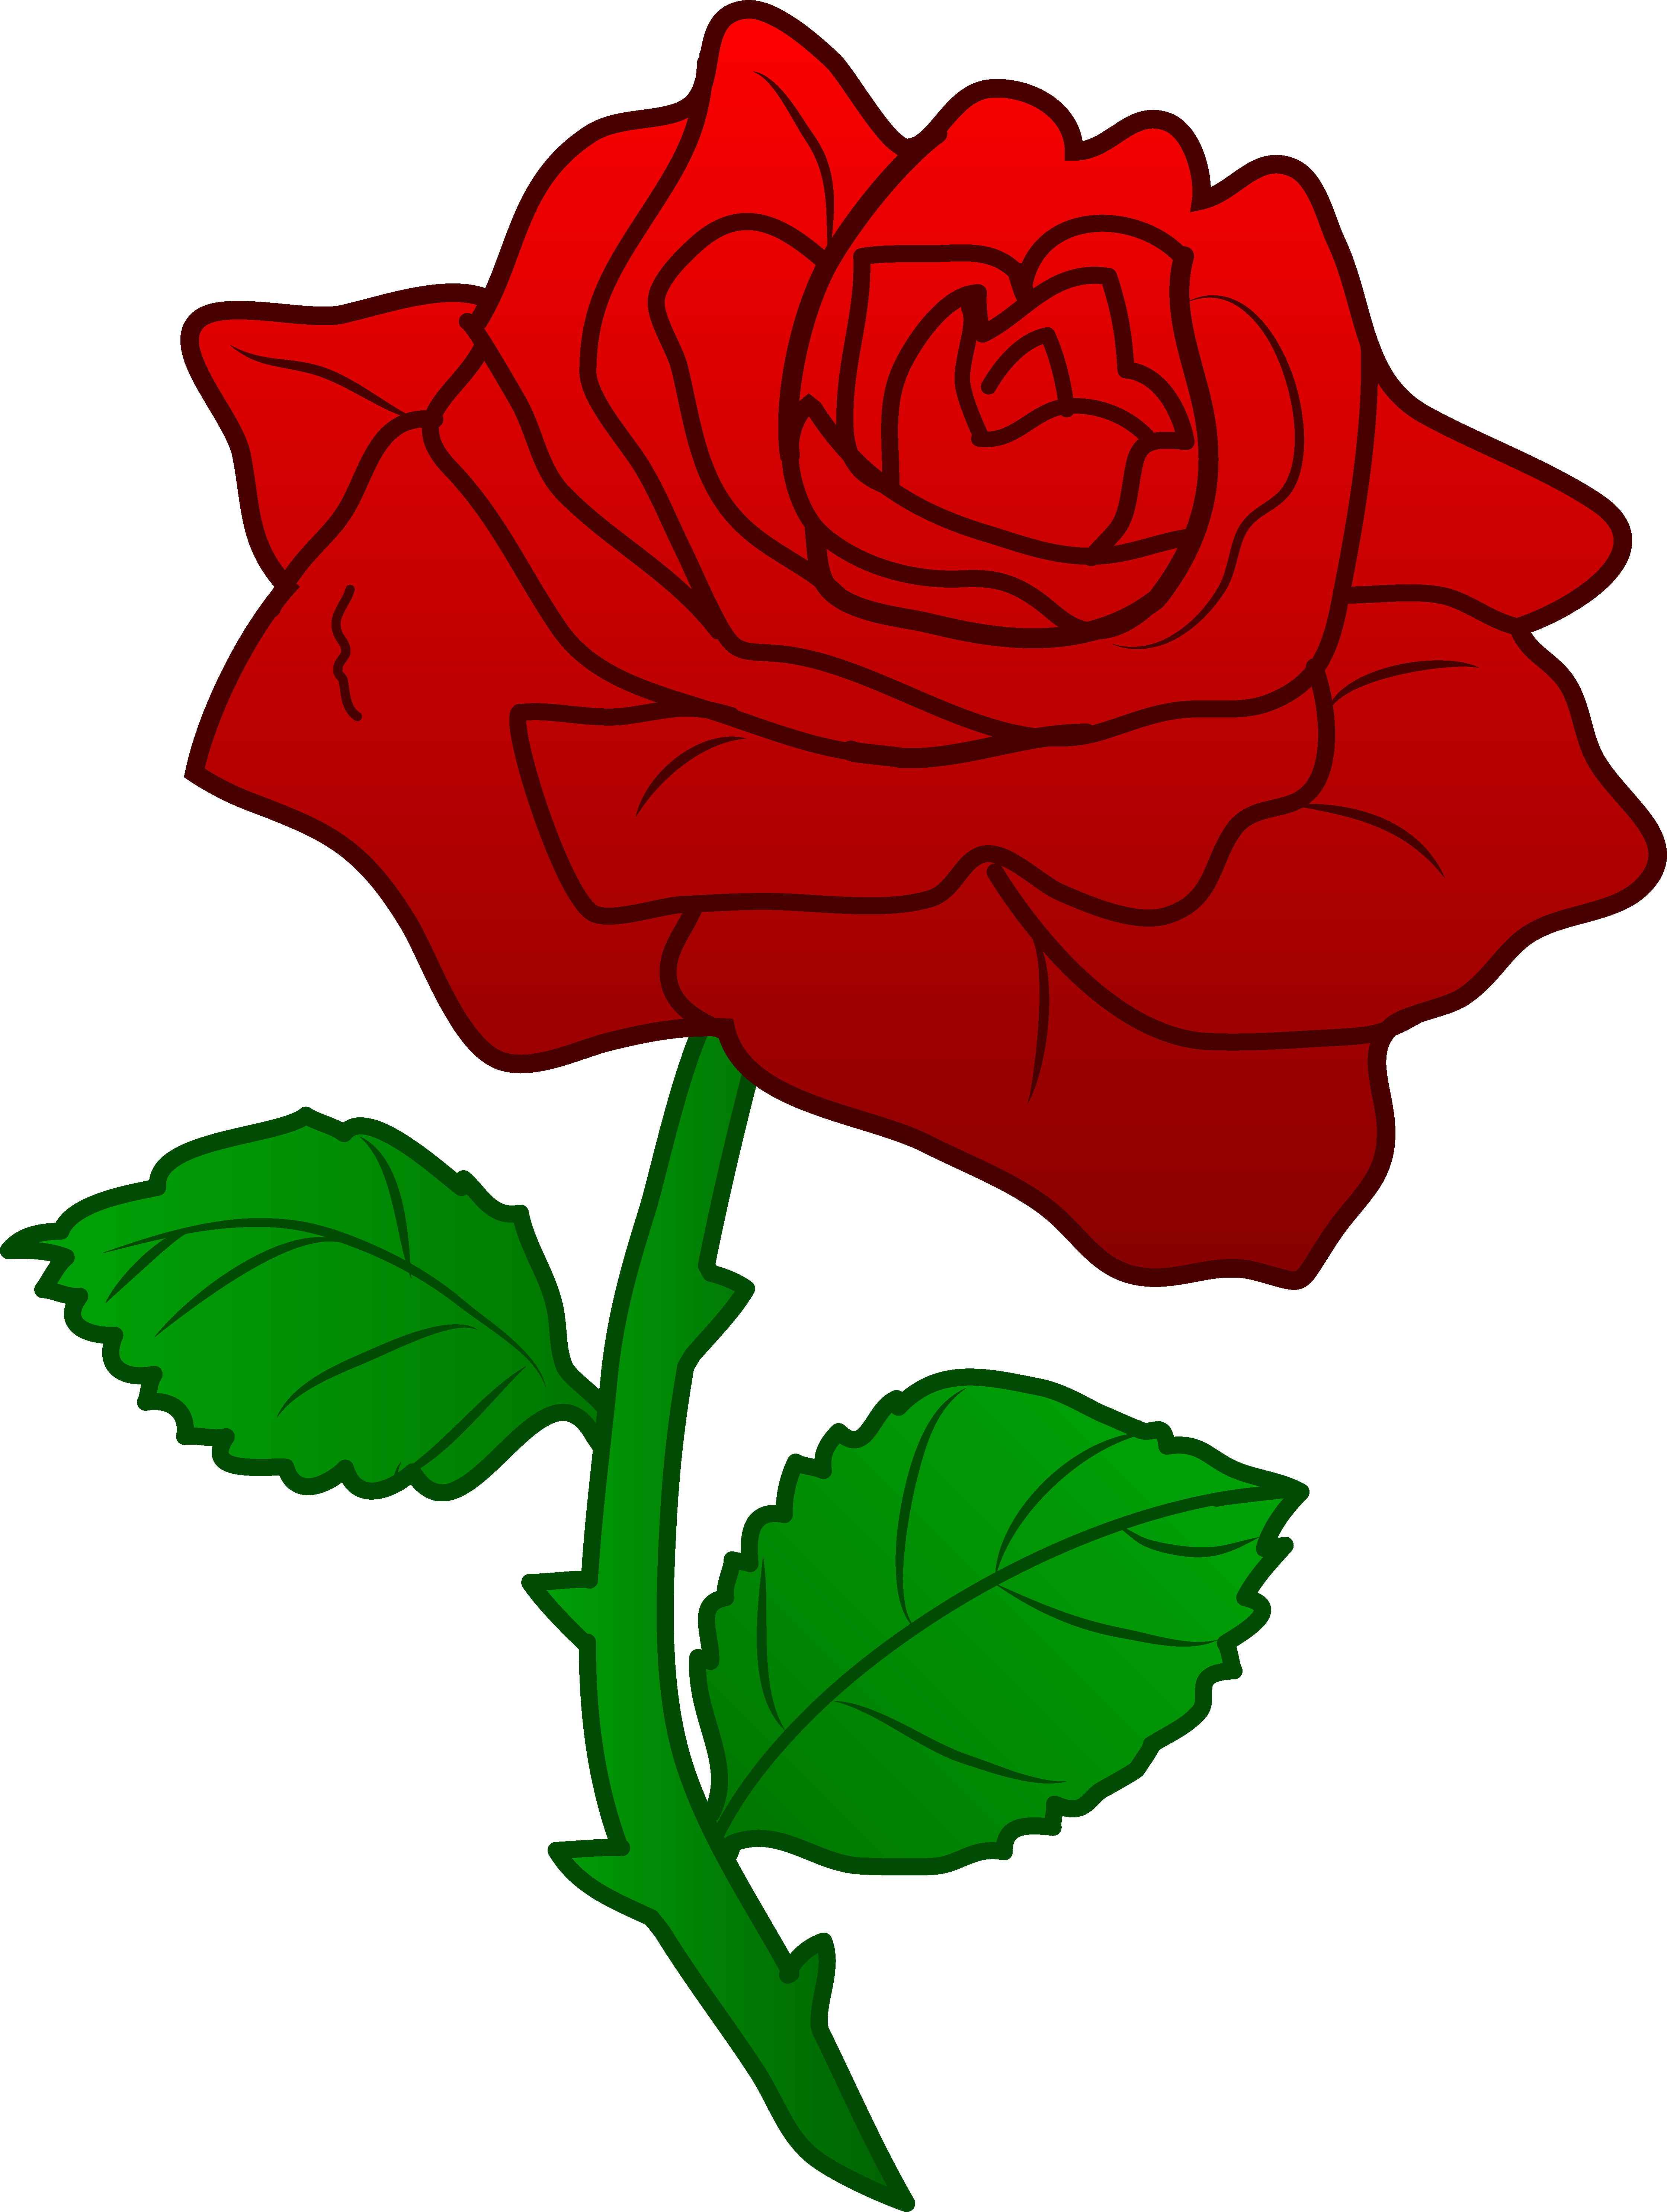 Clipart Rose | Clipart Panda - Free Clipart Images